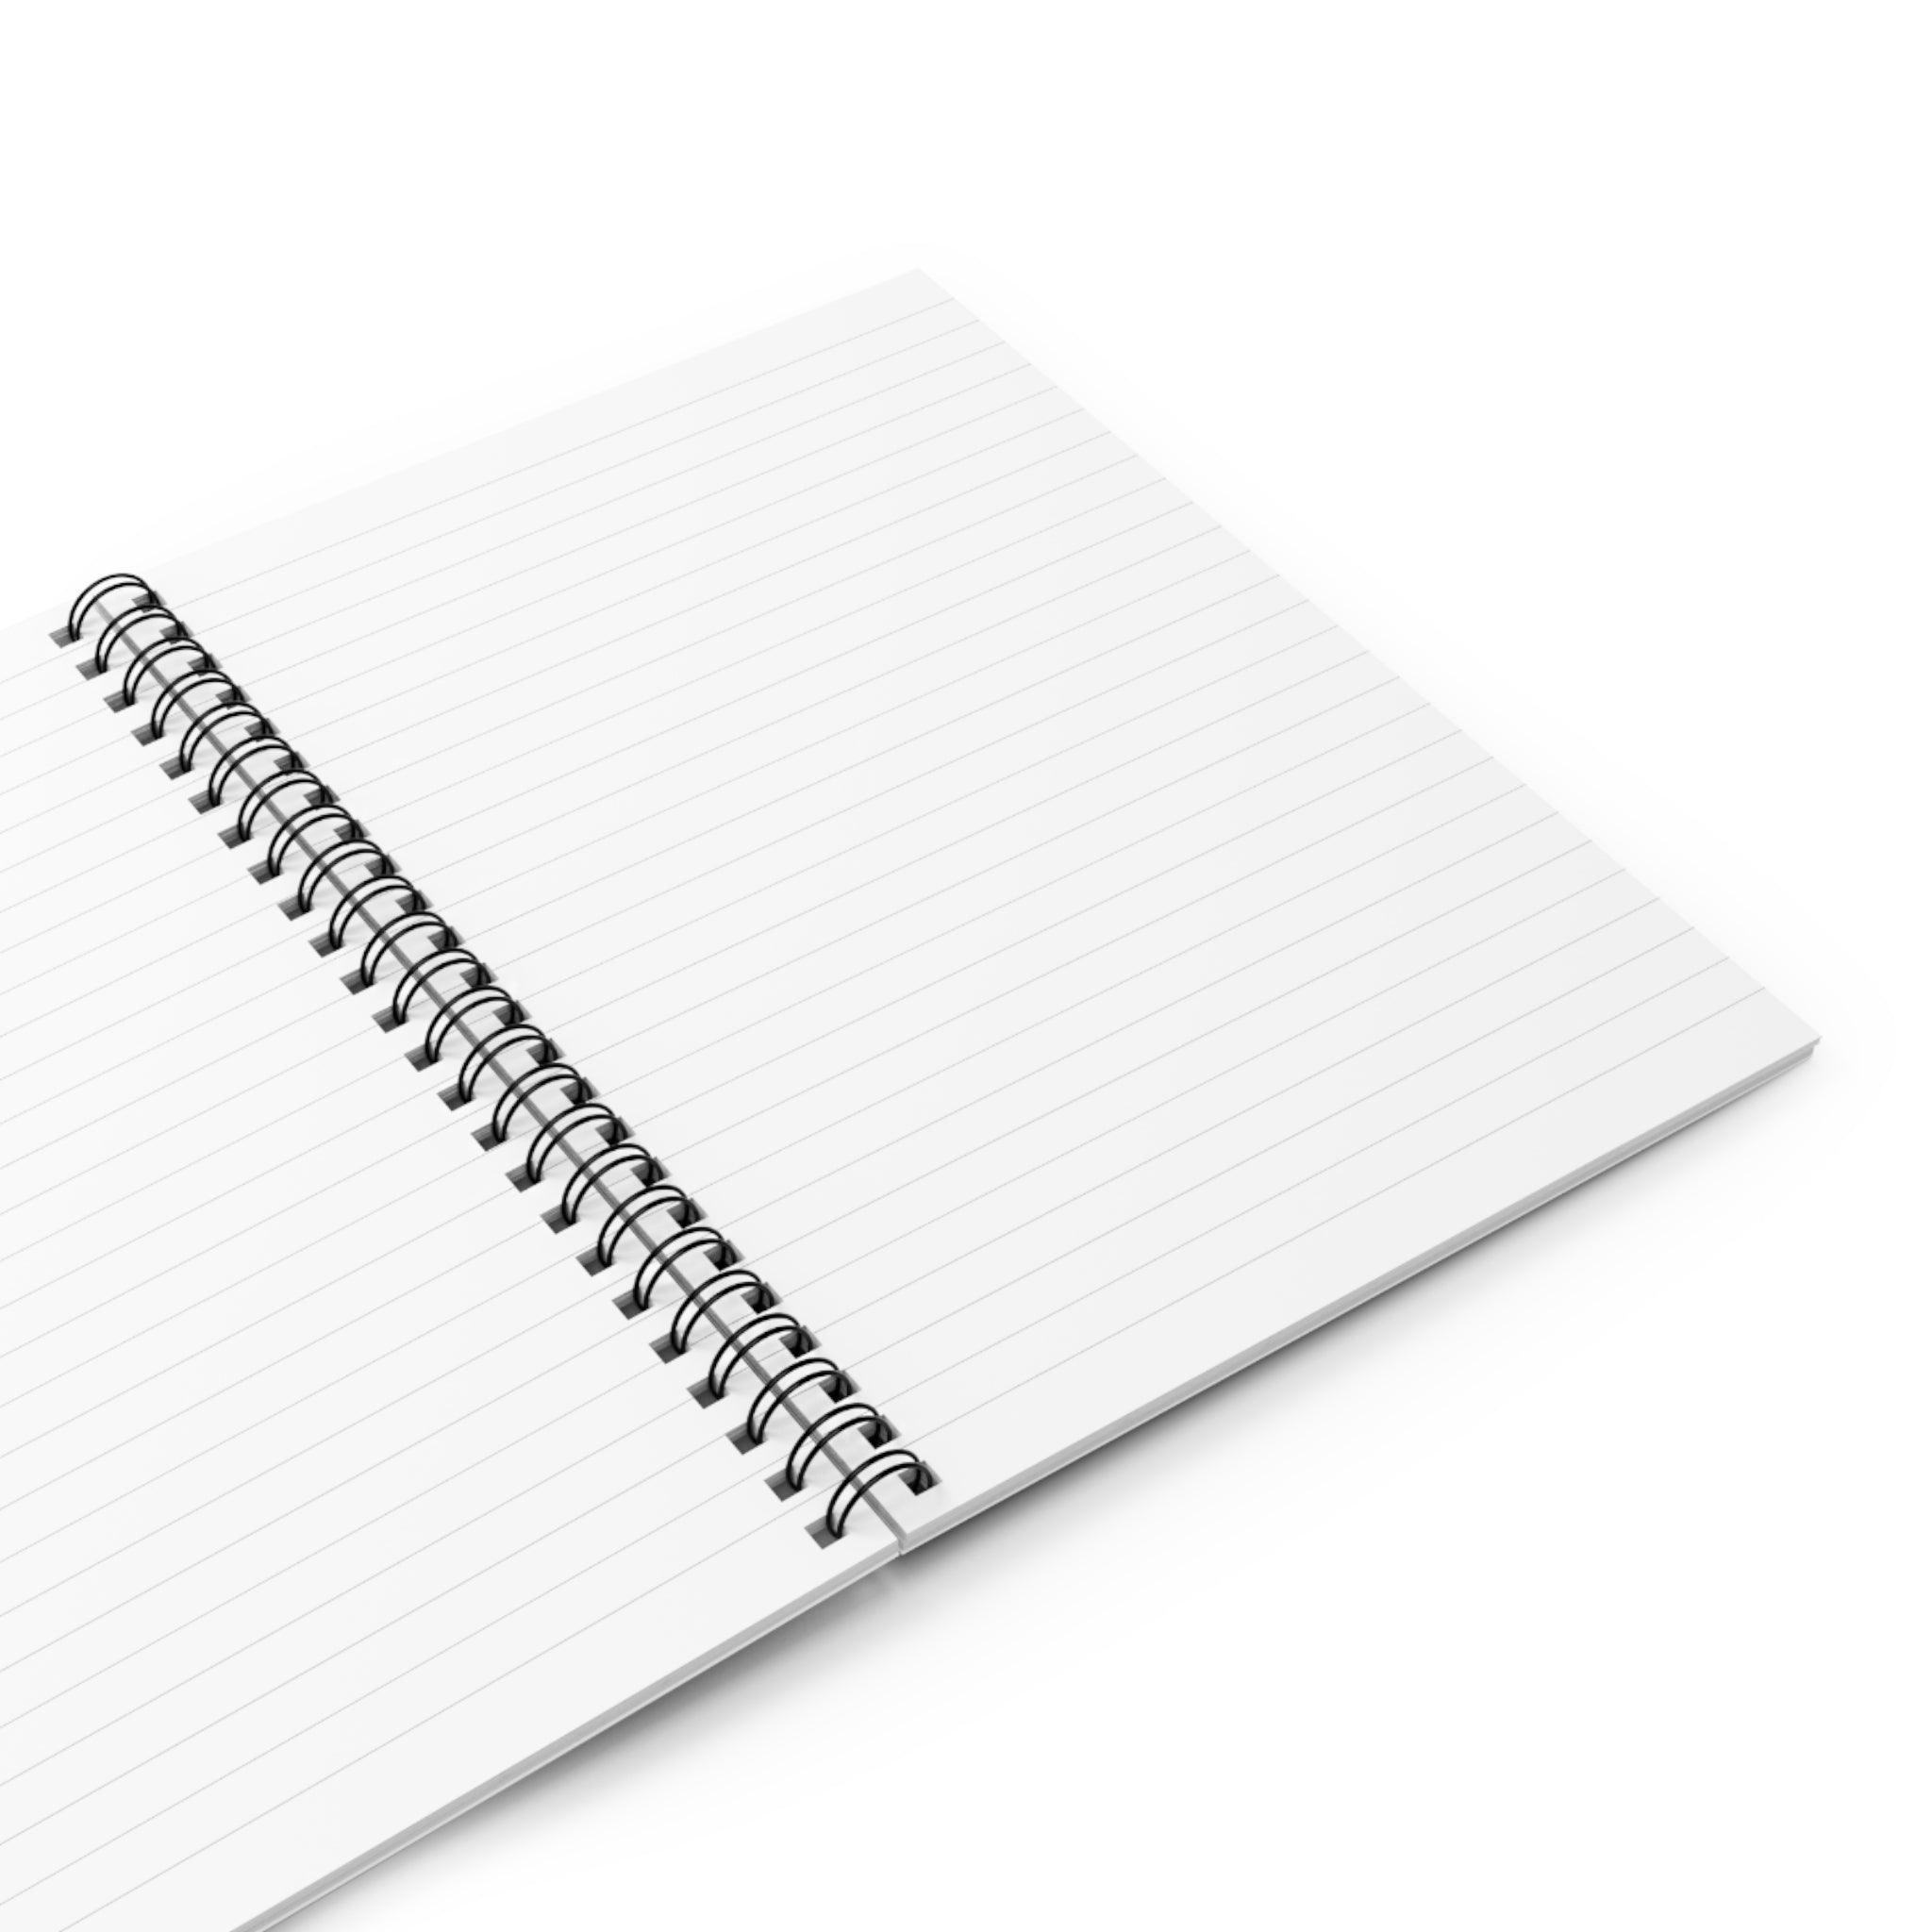 Taurus Spiral Notebook - Ruled Line - Classic Variable